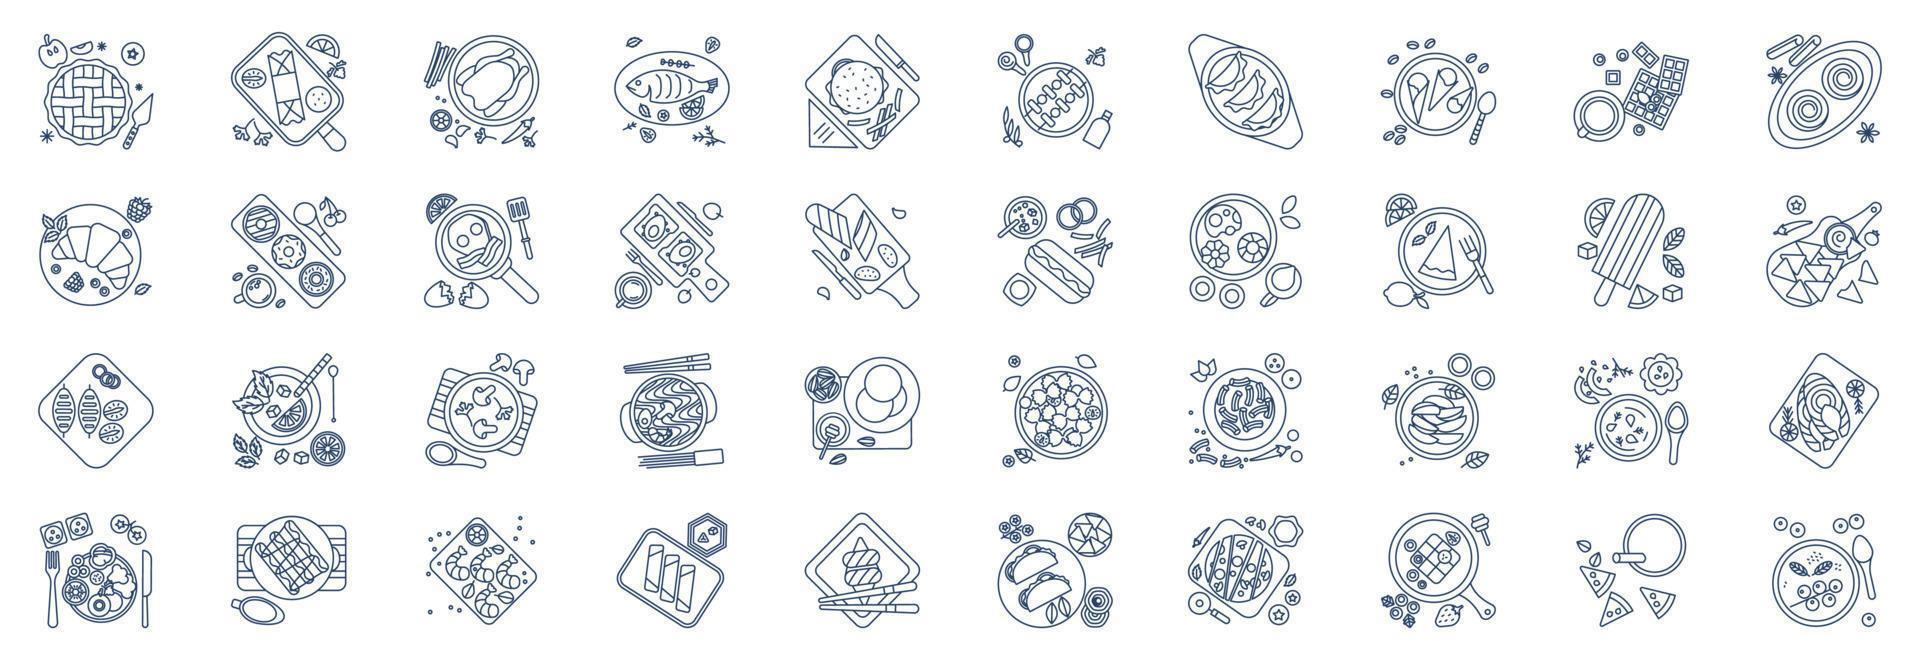 Collection of icons related to Dish and Fine Dining, including icons like Apple pie, Chinese, mojito and more. vector illustrations, Pixel Perfect set